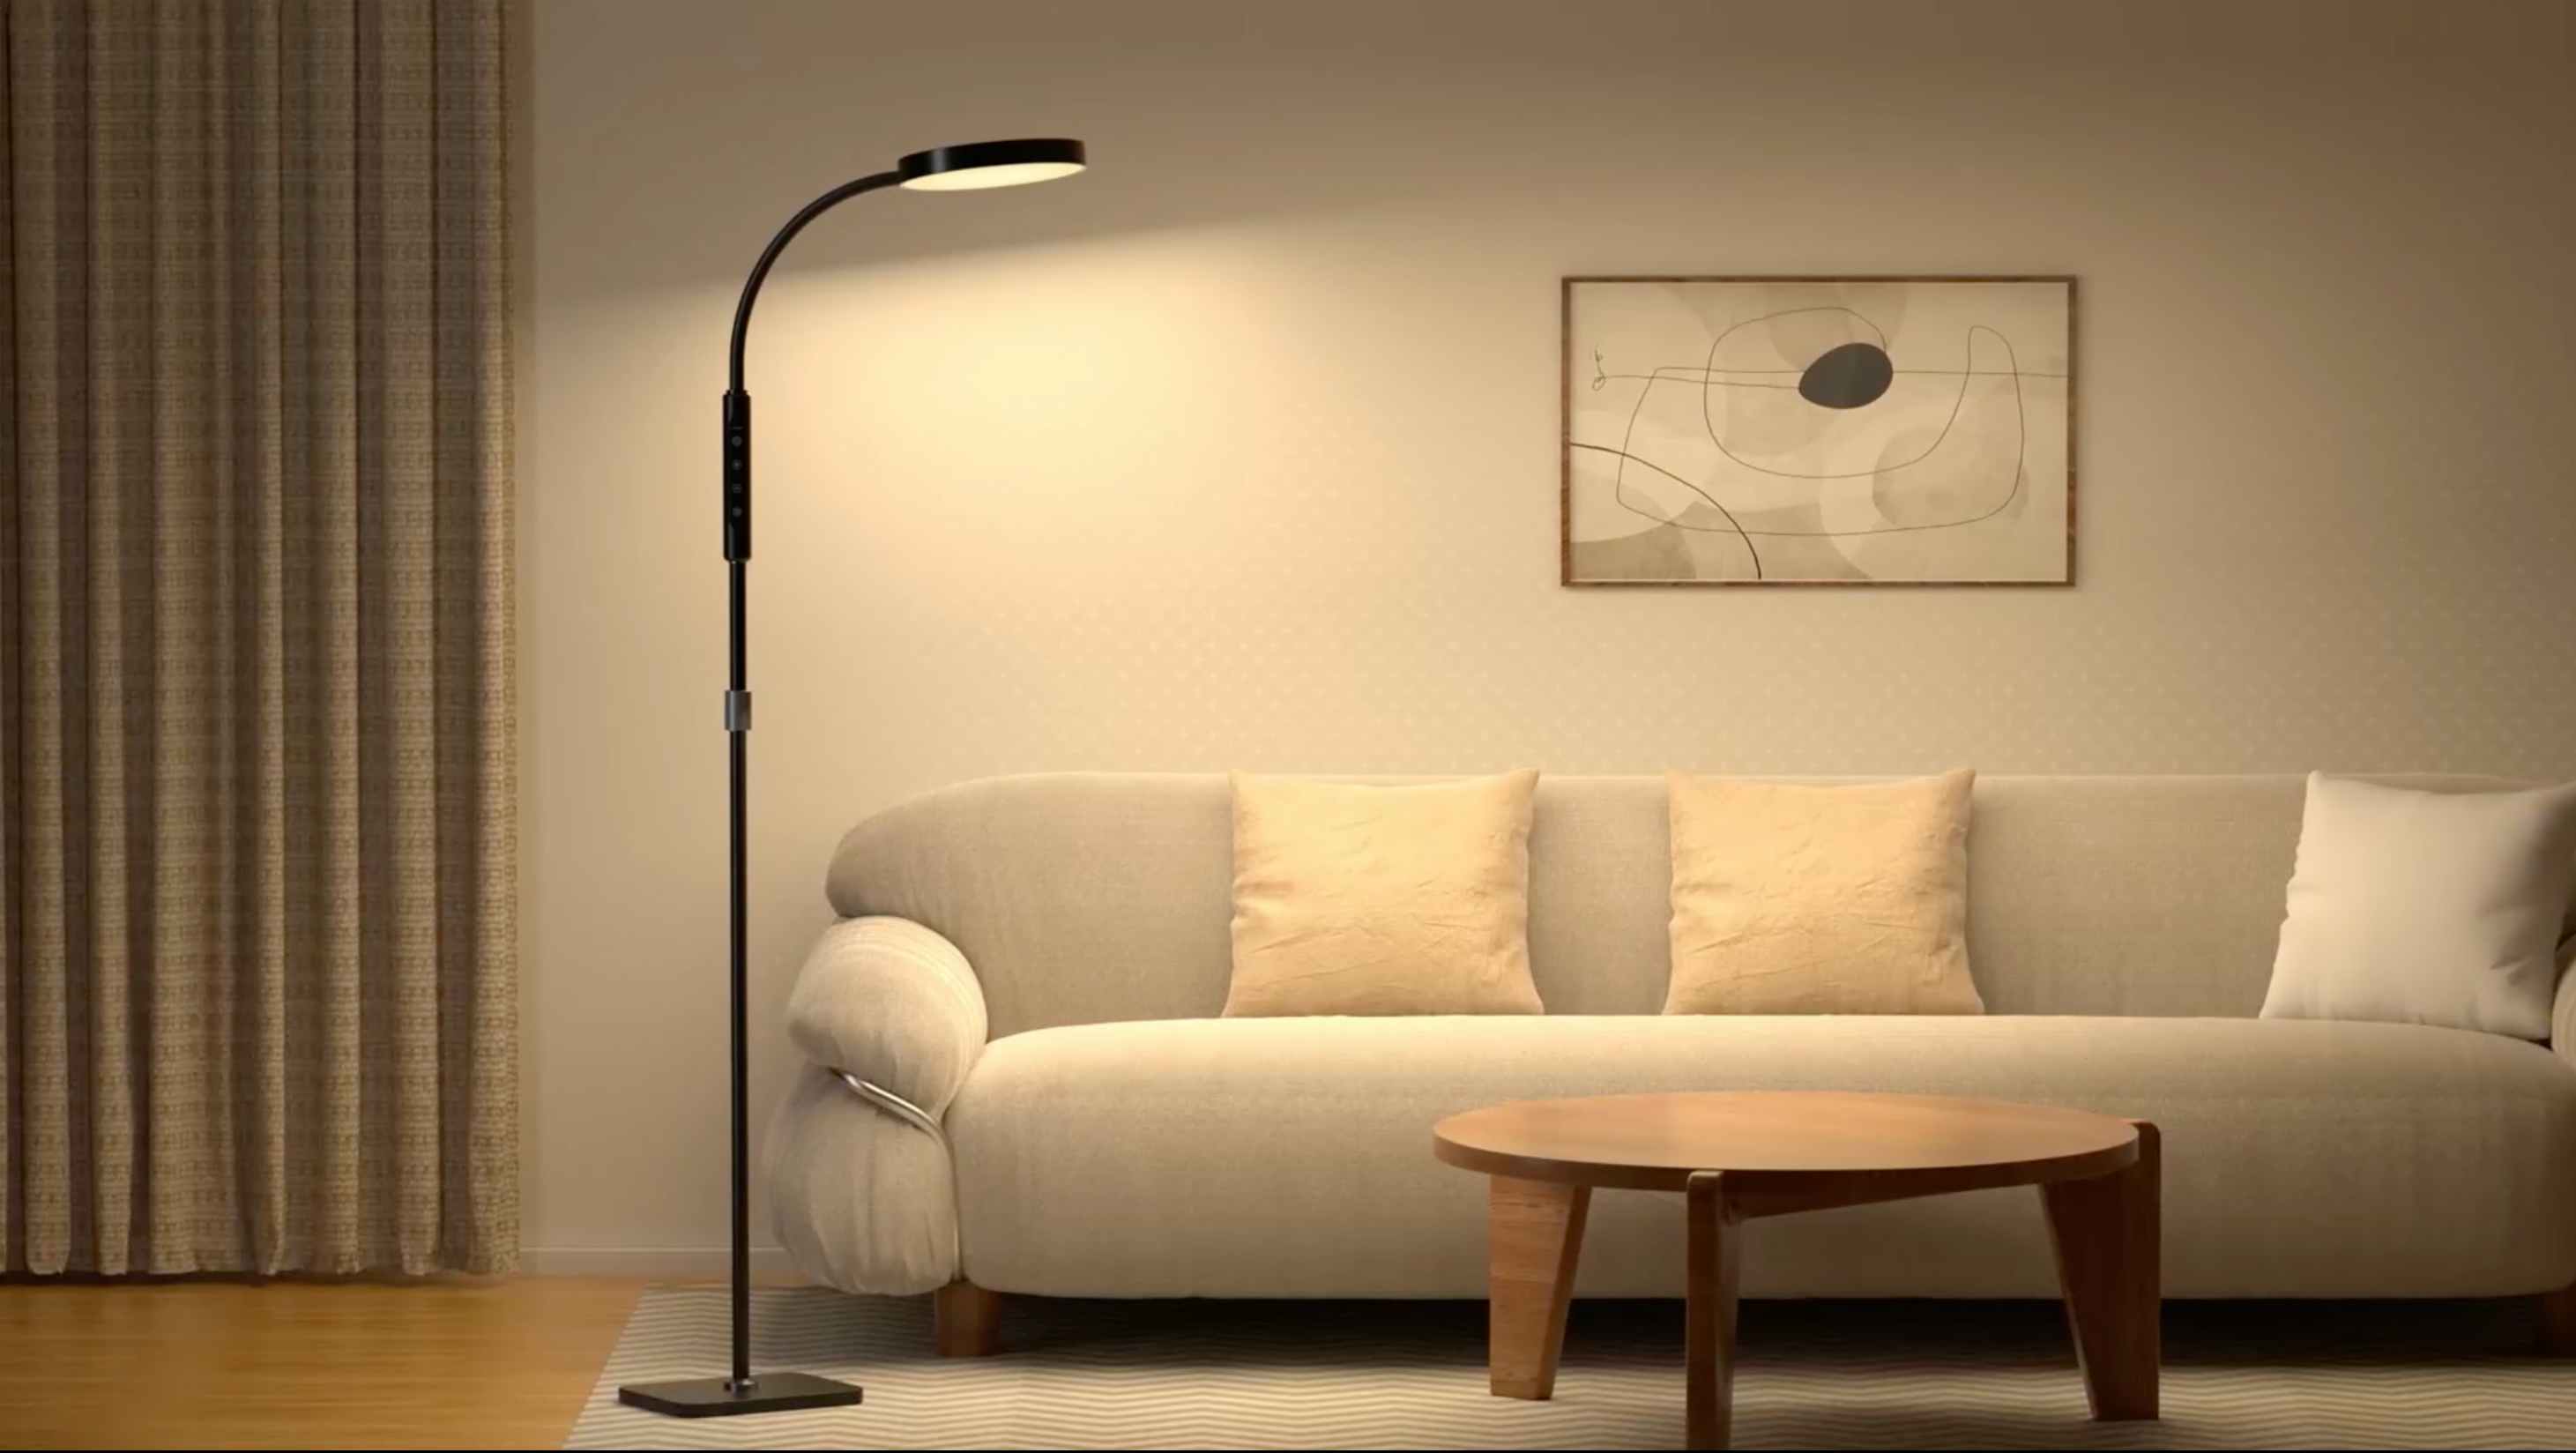 1,000 People Bought This Floor Lamp on Amazon in April — It's Now $30